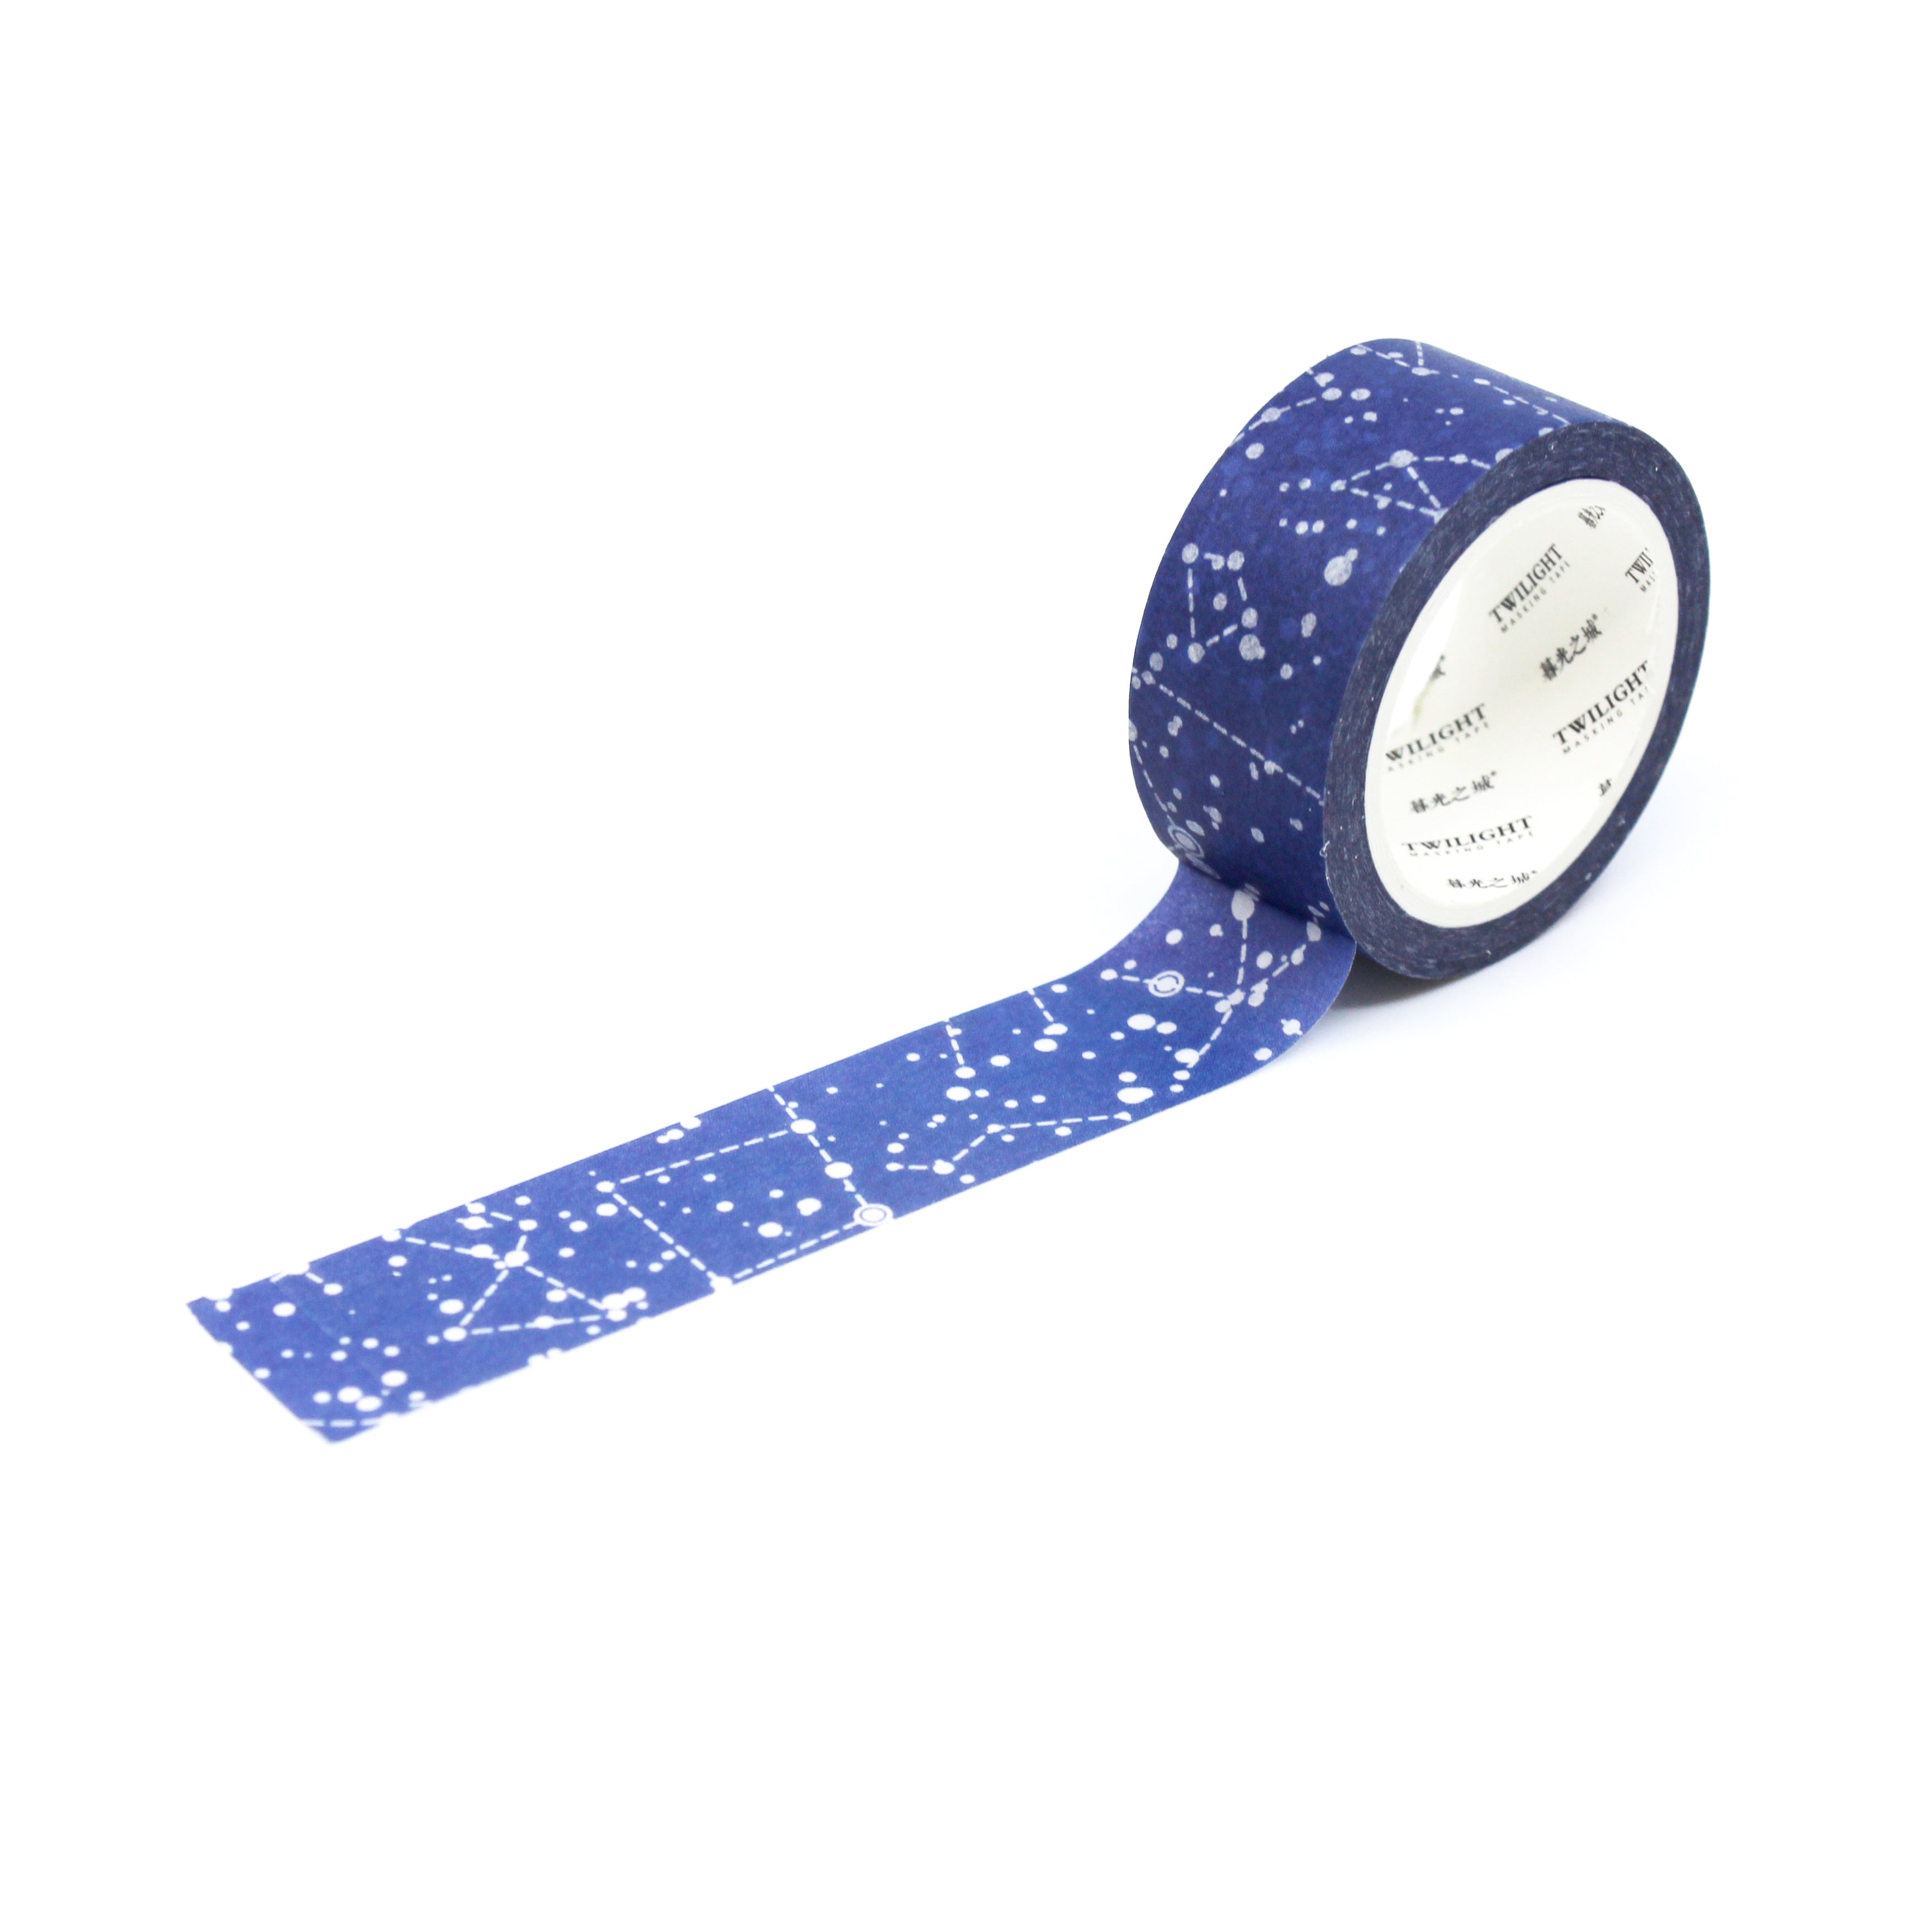 This is a repeat full view pattern of blue constellation astronomy pattern washi tape from BBB Supplies Craft Shop